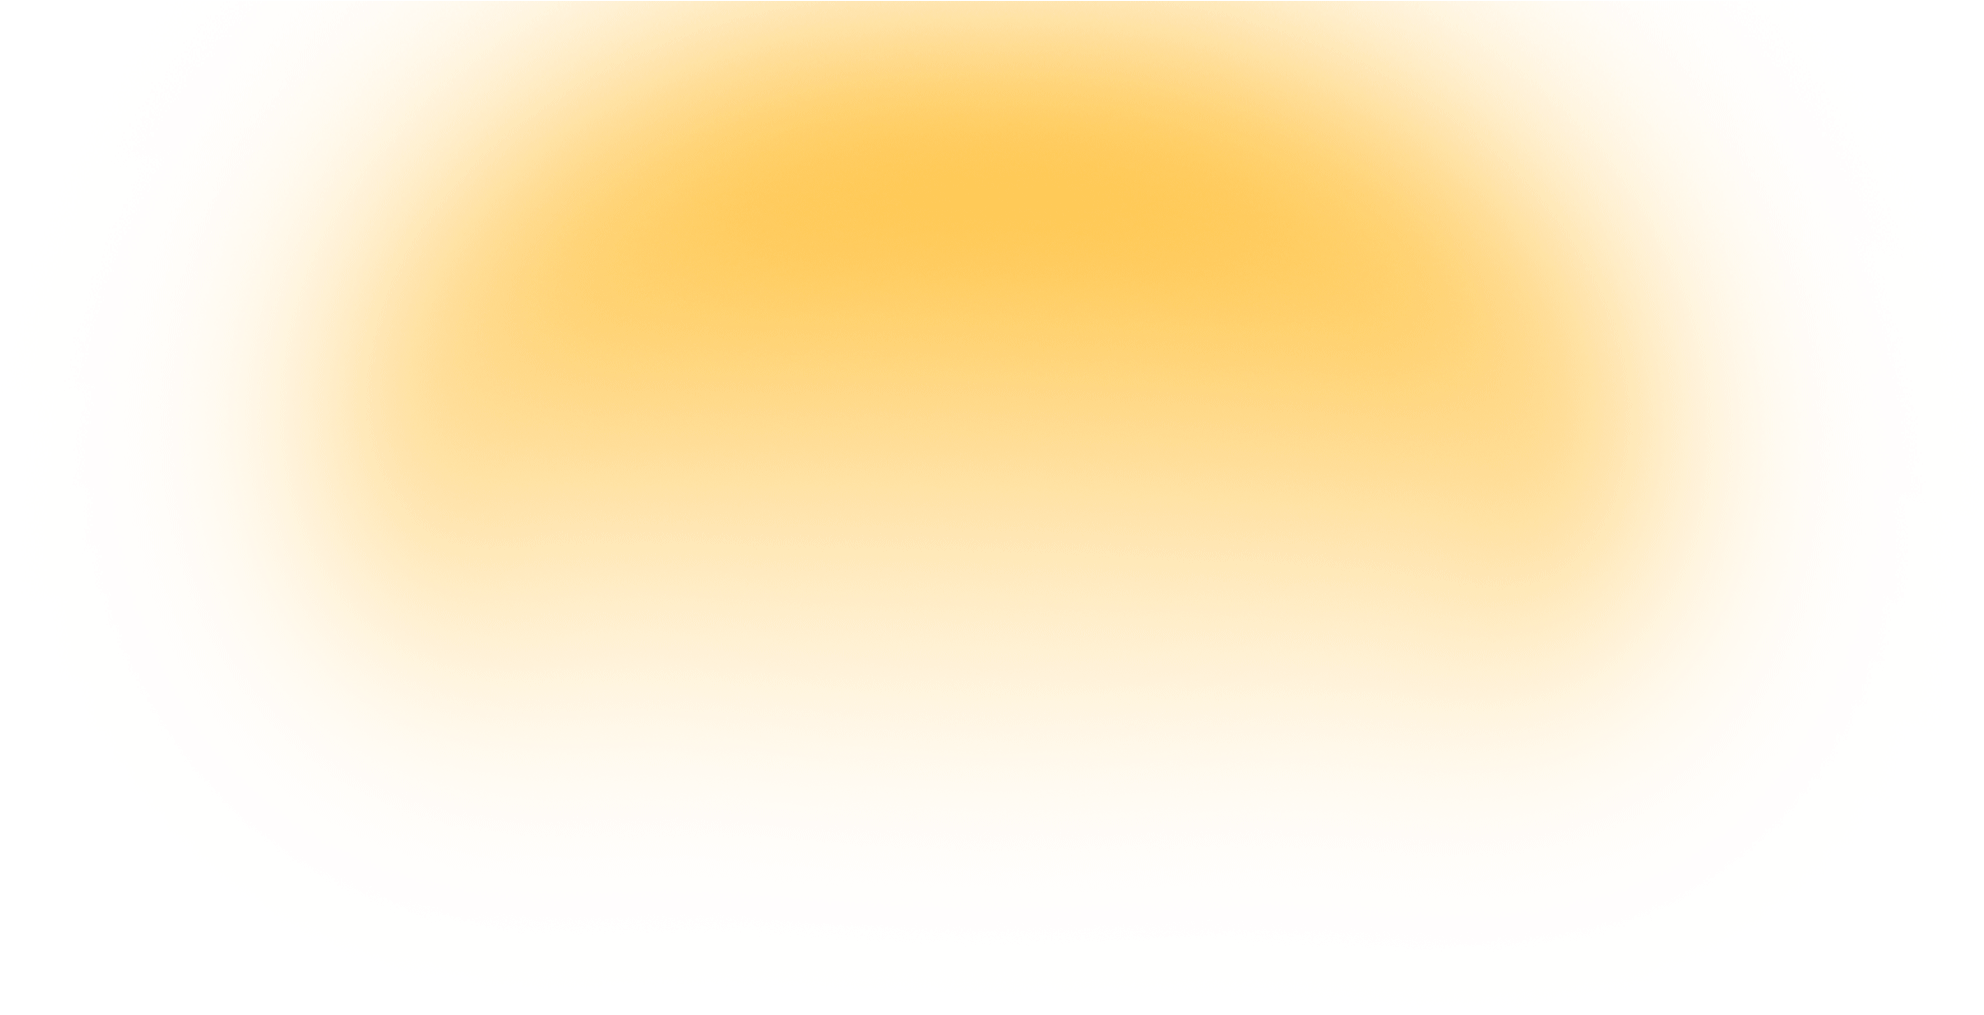 A Black And Yellow Gradient